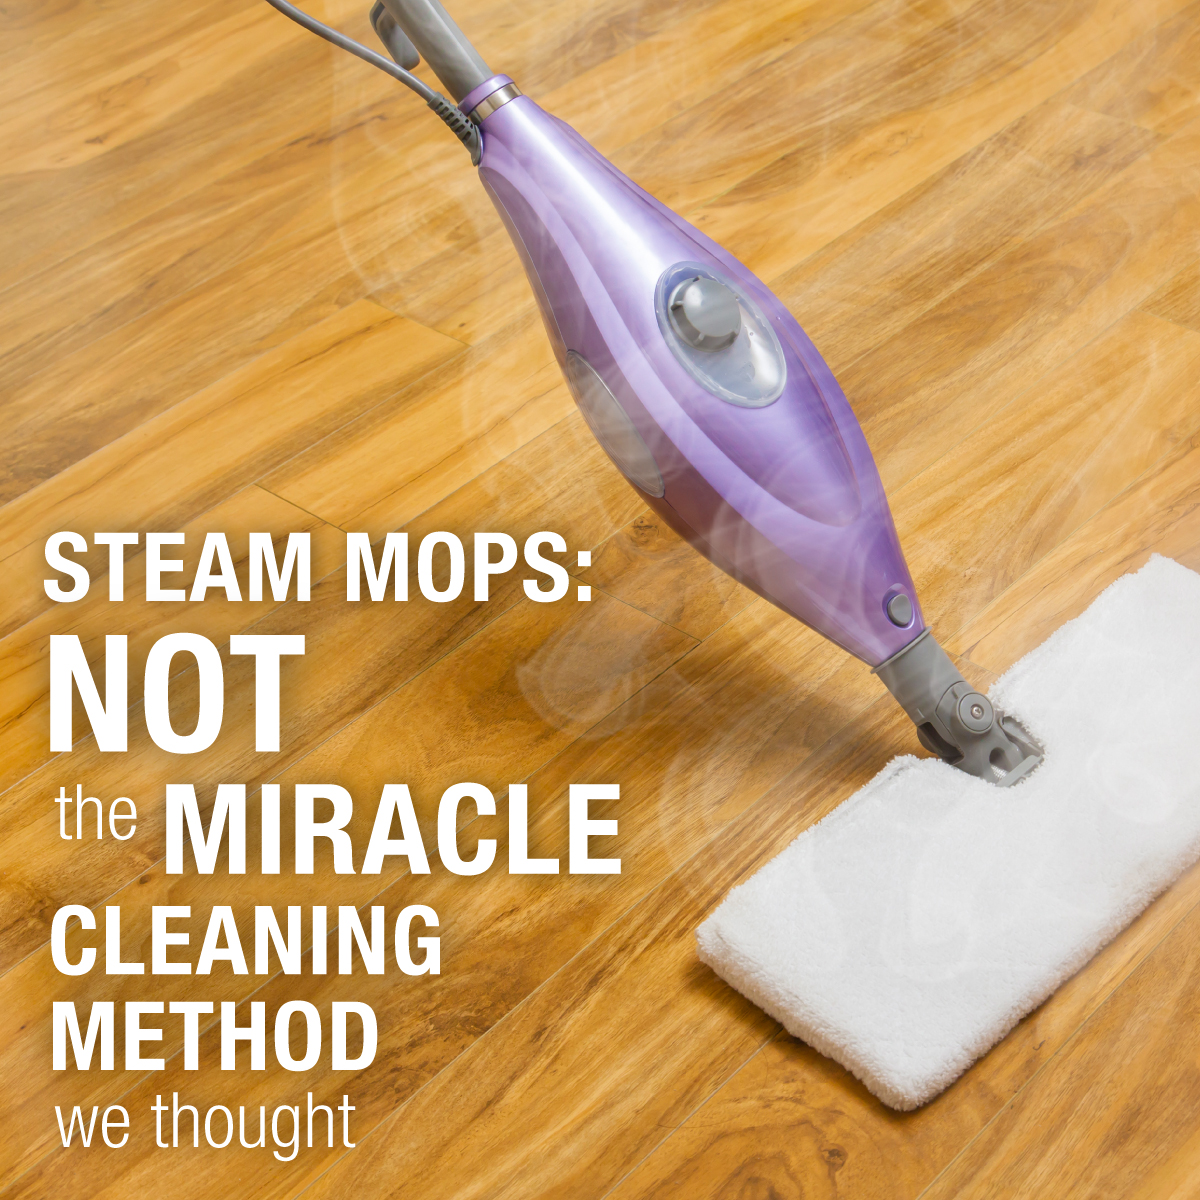 Steam Mops Not The Miracle Cleaning, Can You Use A Steam Mop On Waterproof Vinyl Plank Flooring